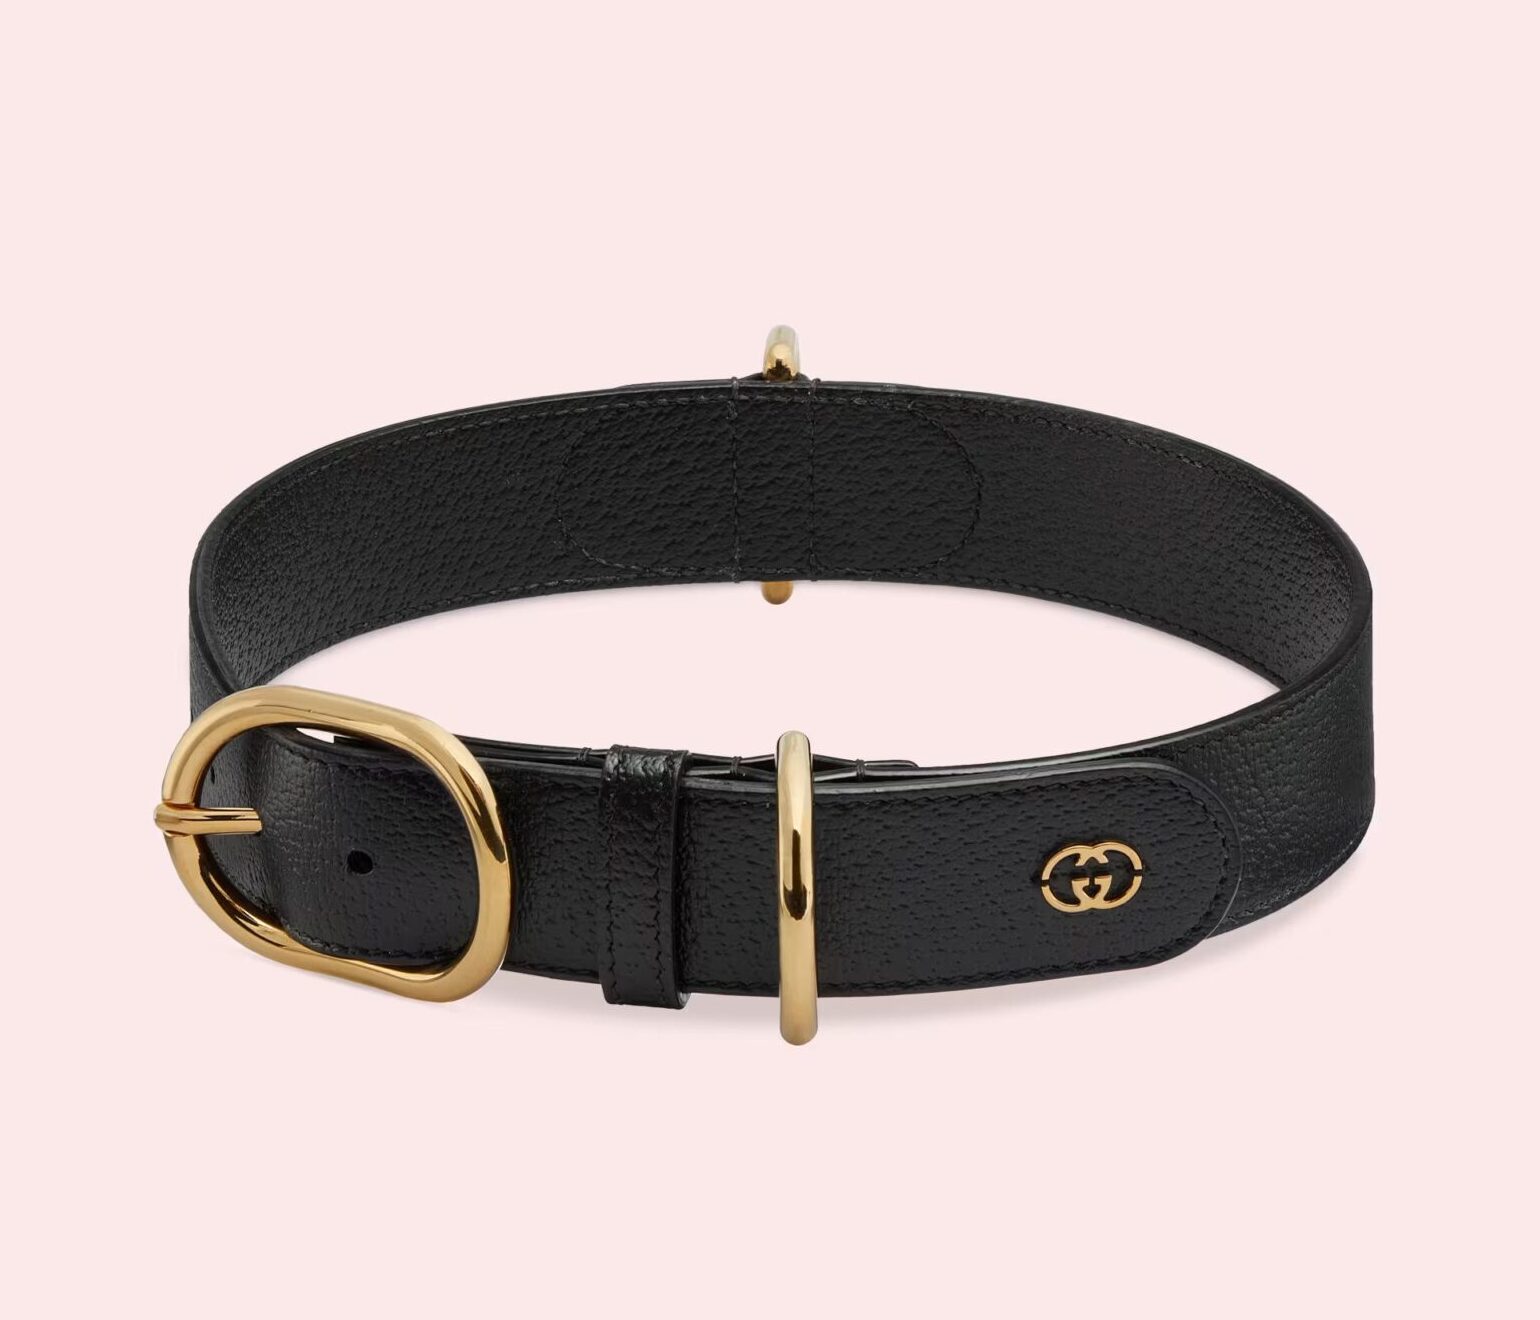 Chic designer dog collars to shop for your pup: GUCCI Black Demetra Pet Collar